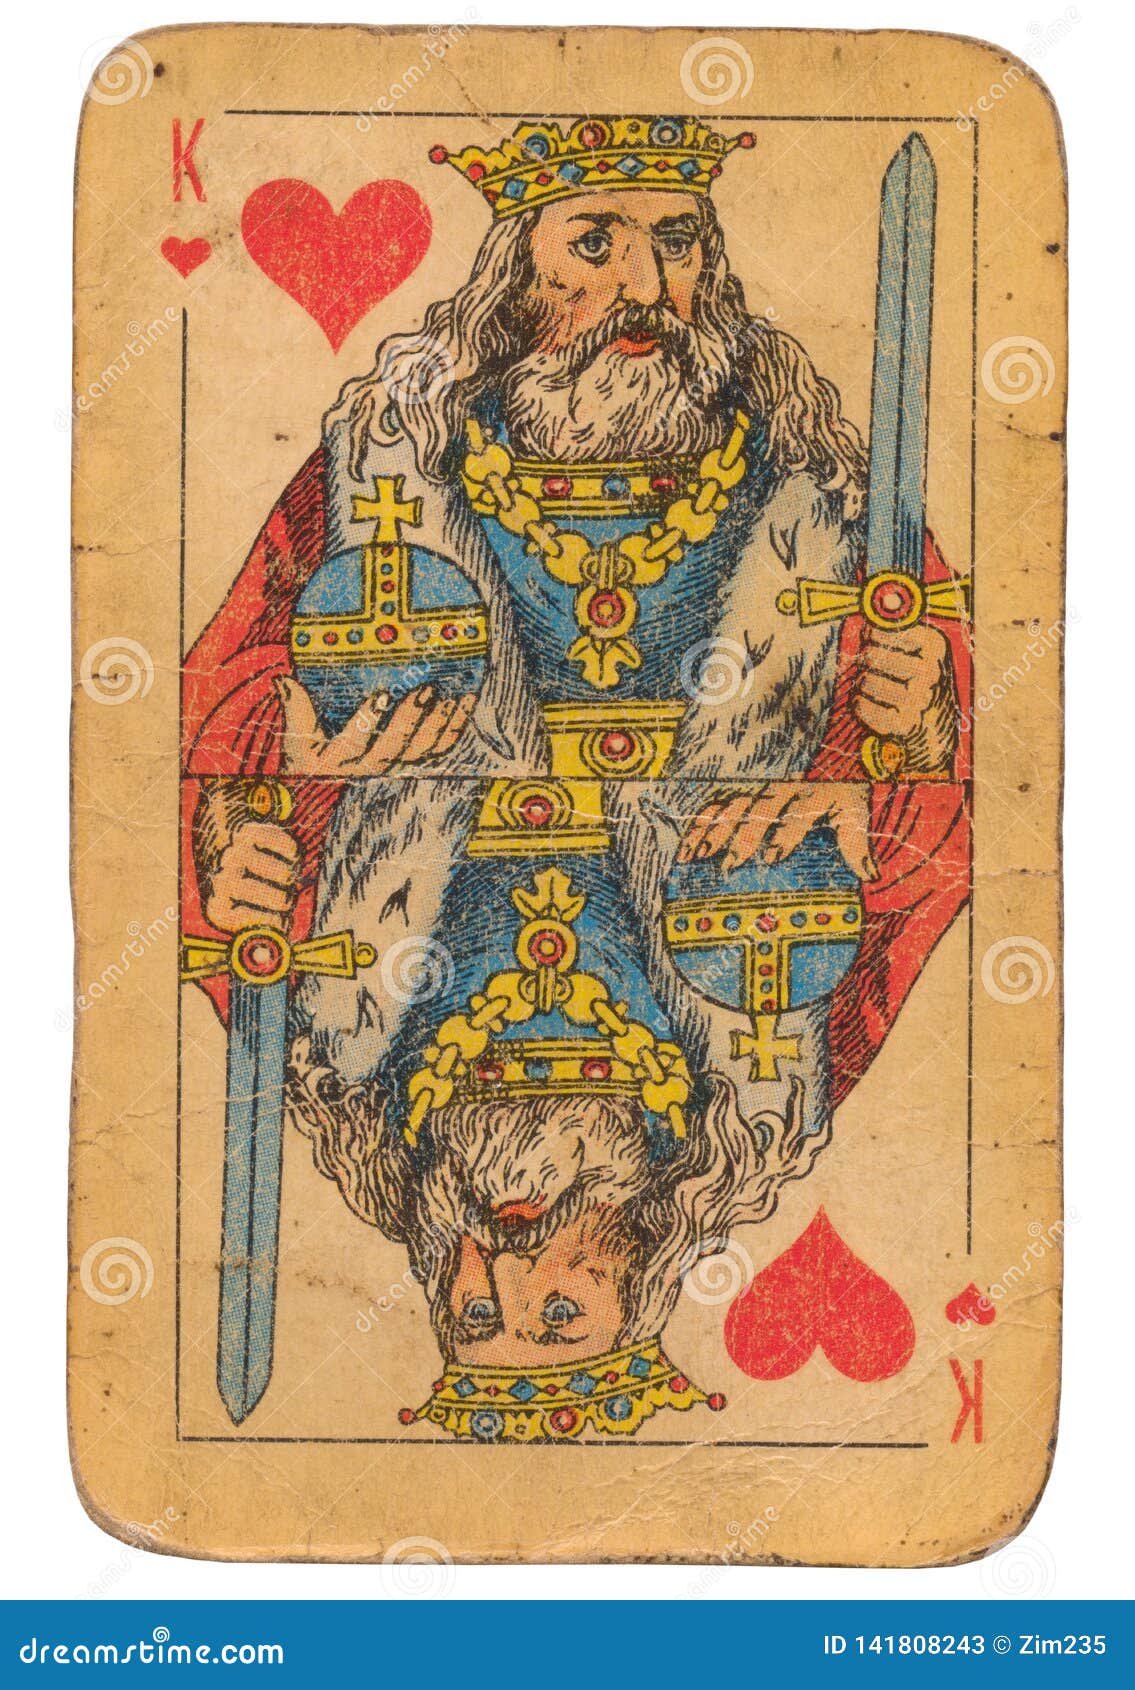 King Of Hearts Old Grunge Soviet Style Playing Card Stock Image